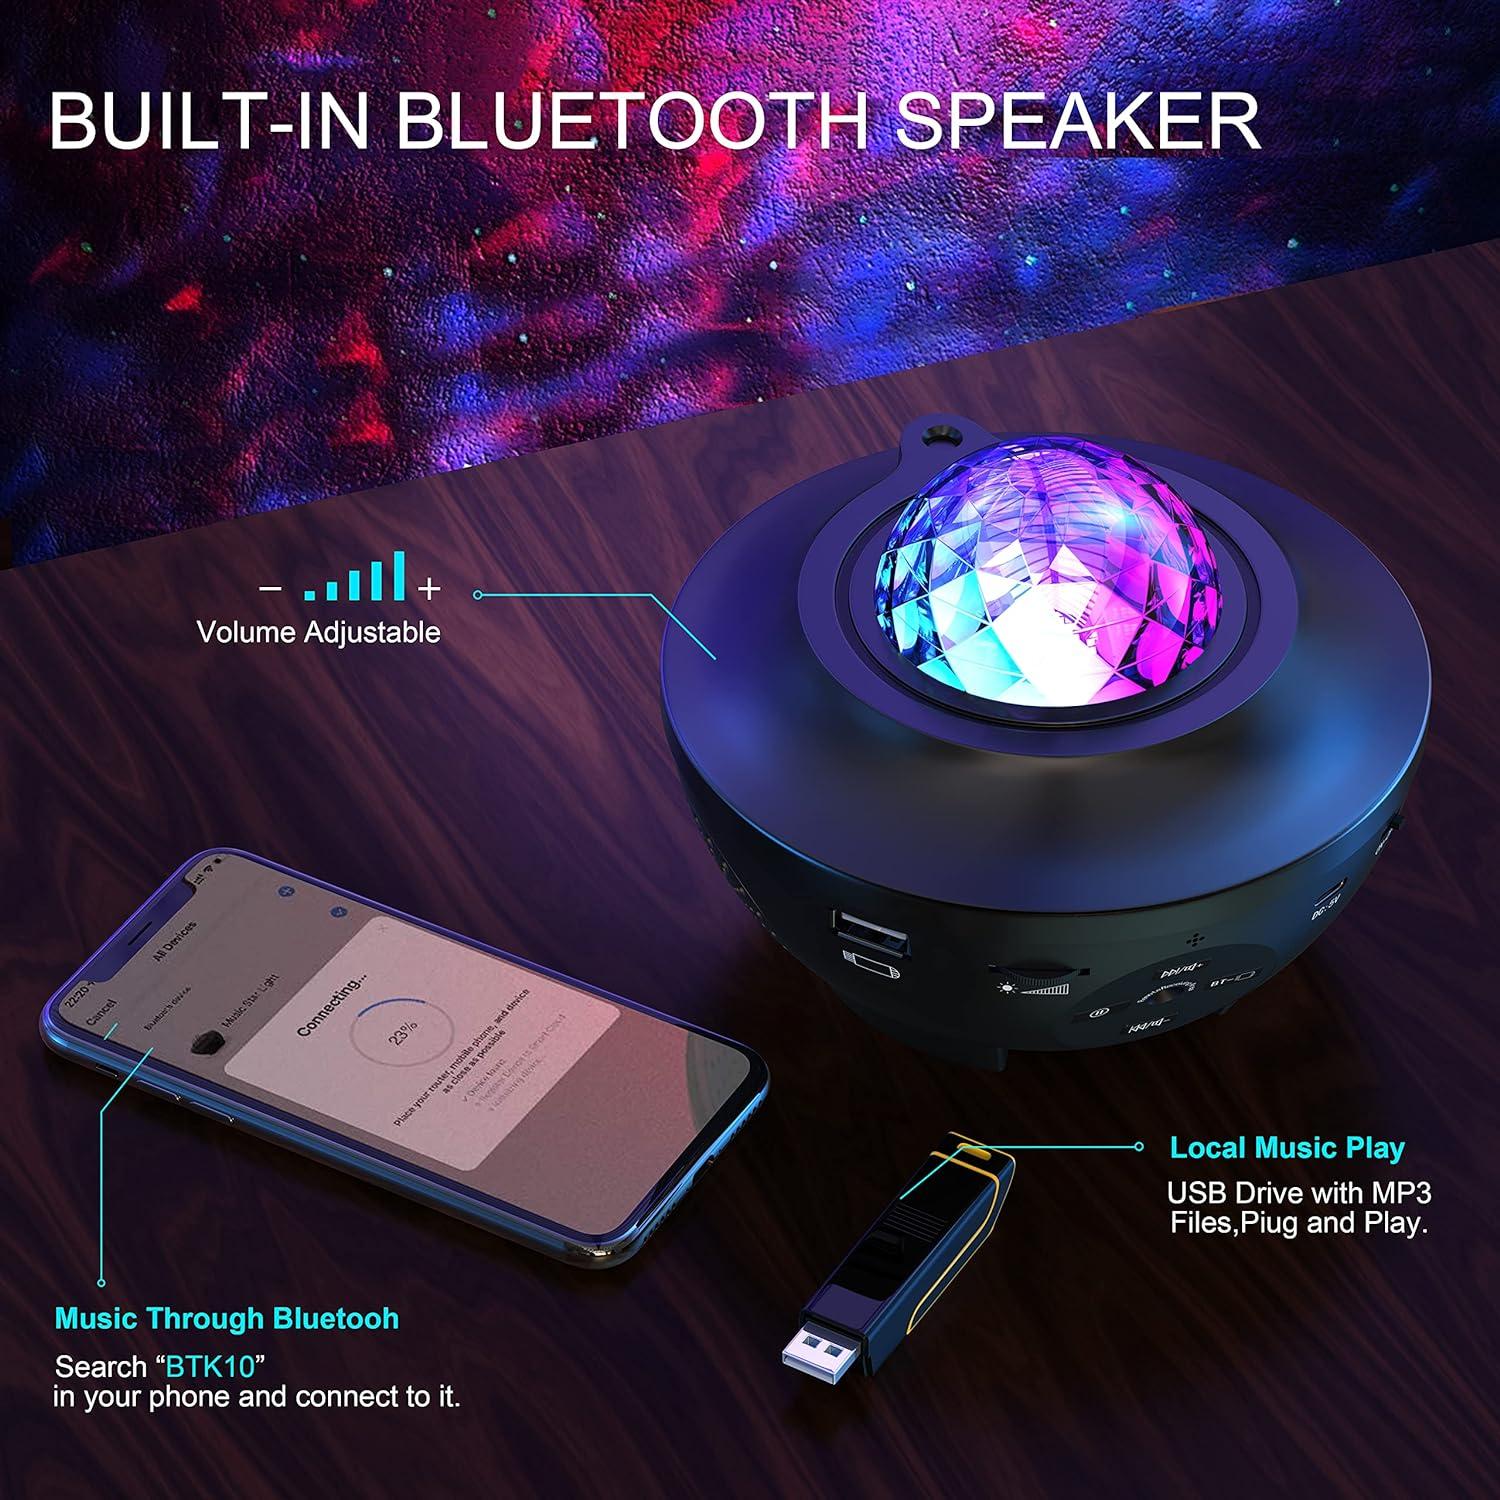 Star Night Light Projector, 3 in 1 LED Galaxy Projector with Remote  Control/Bluetooth Speaker/Timer/Sound Activated 10 Colors Mixed Ocean Wave